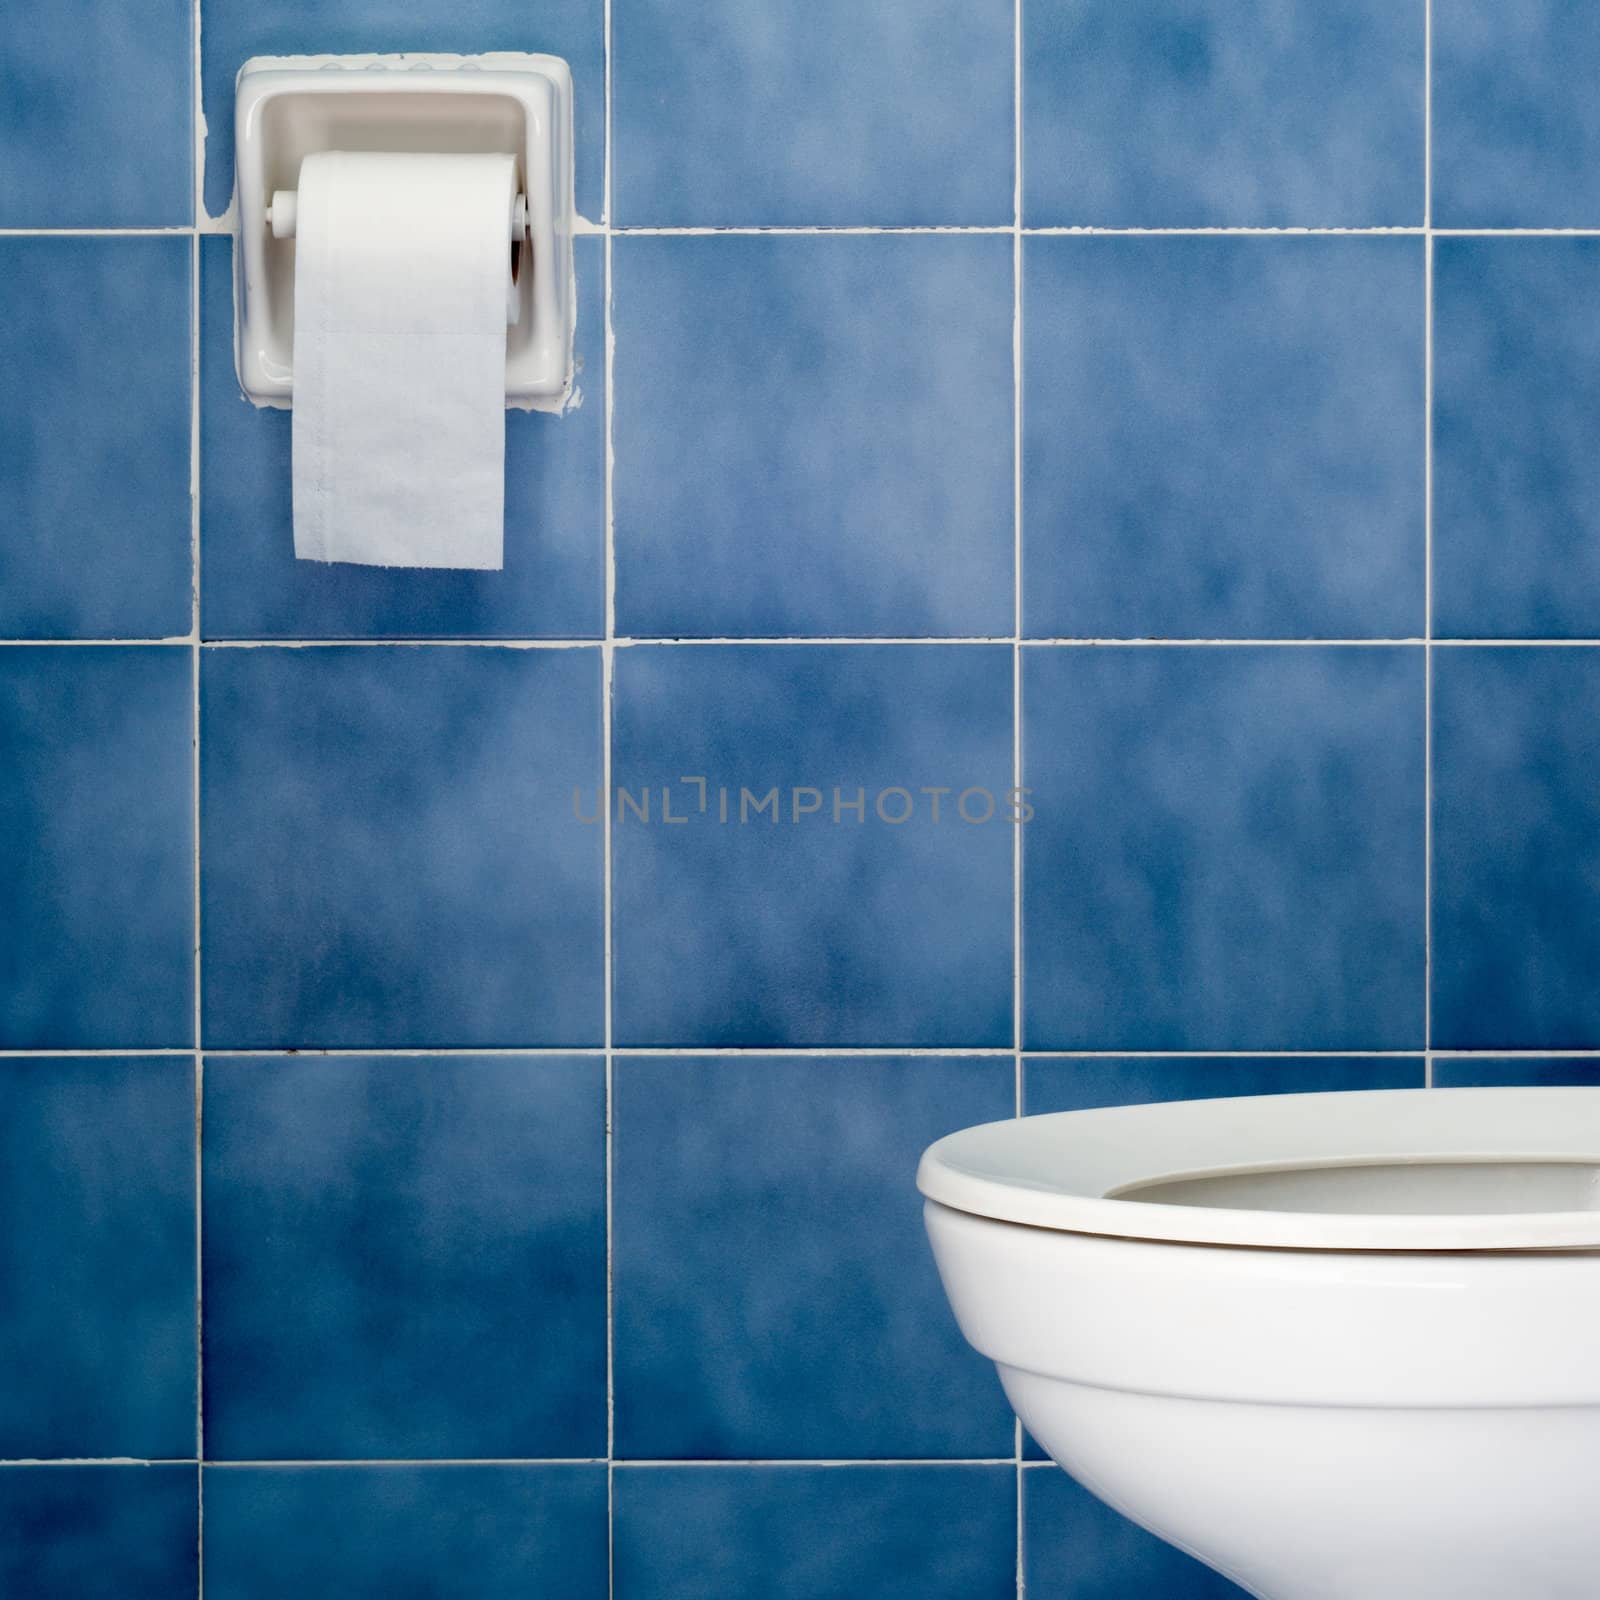 White sanitary ware and tissues in Blue bathroom